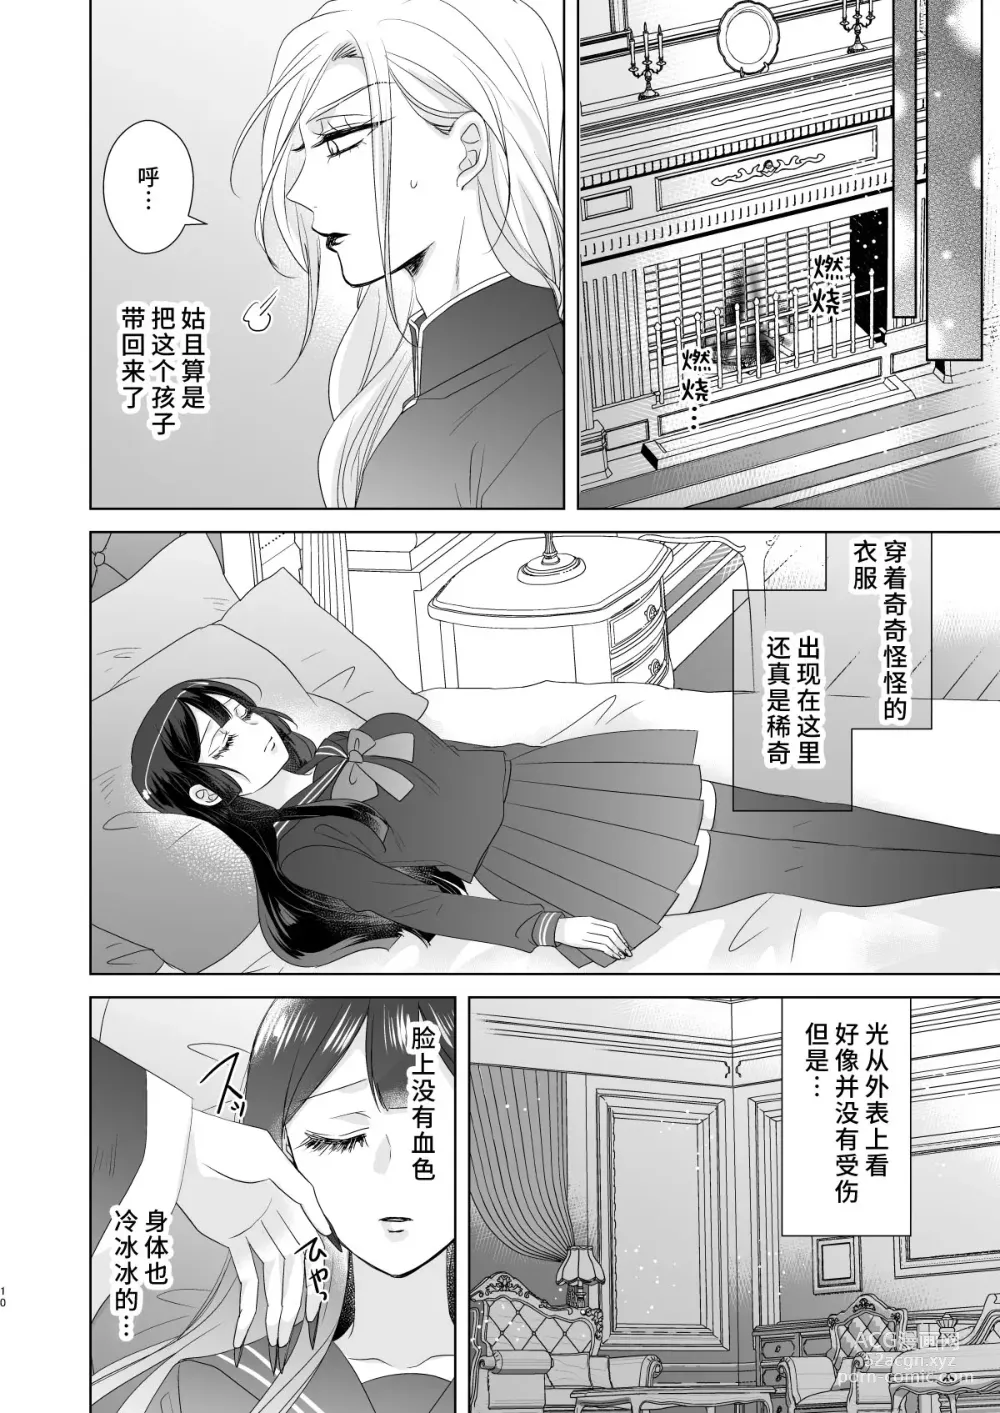 Page 9 of doujinshi 男大姐♂吸血鬼和少女